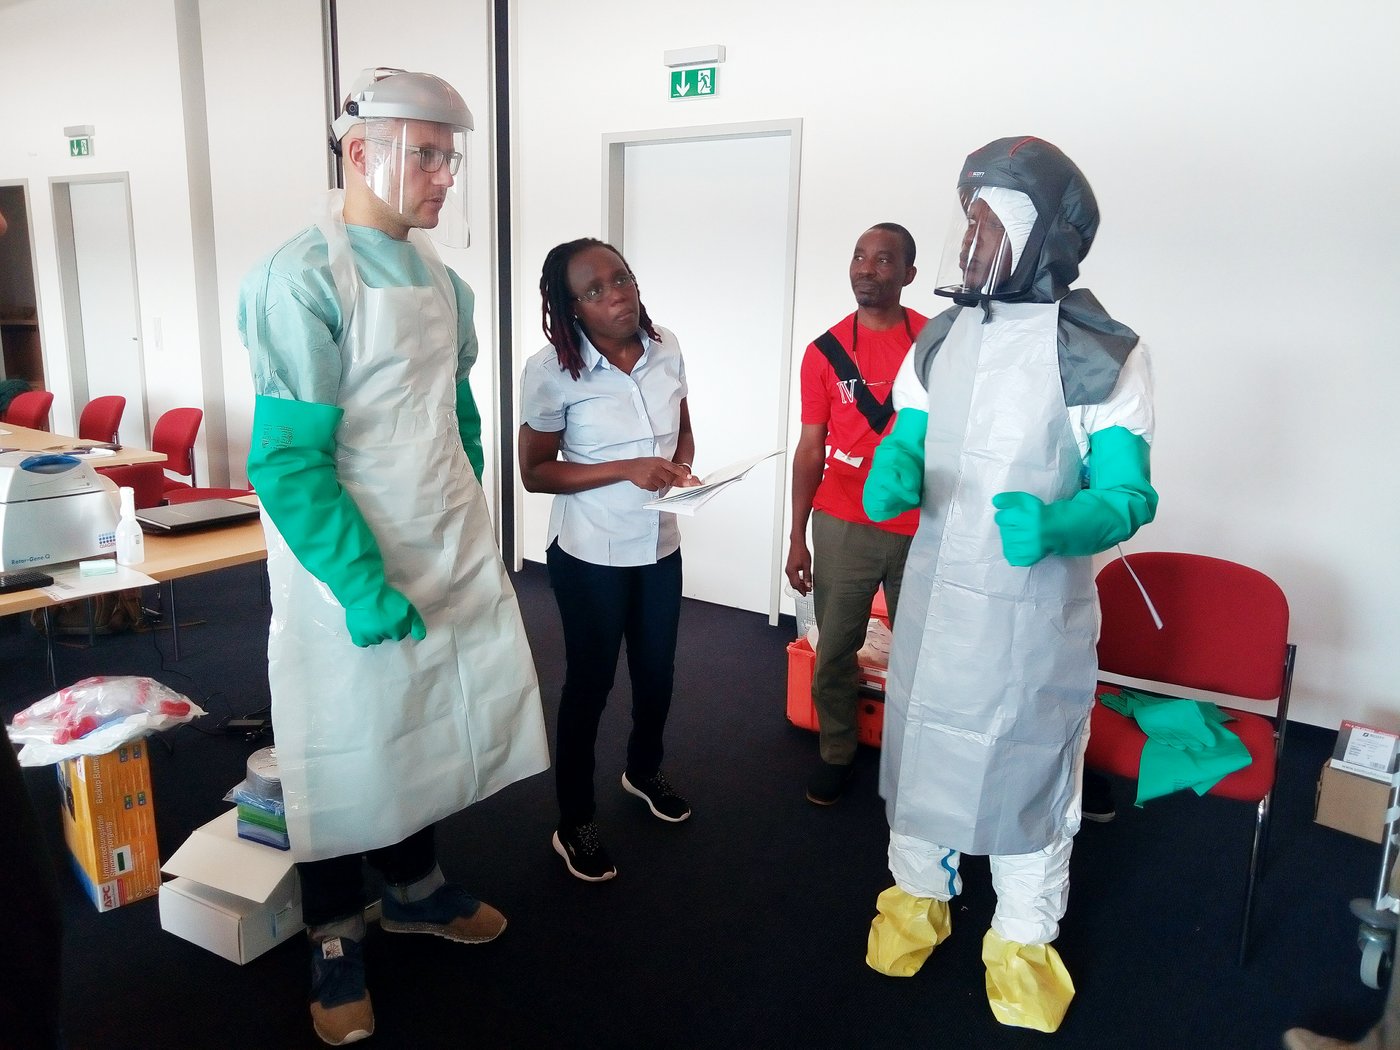 The picture shows a course situation with four scientists, two of them dressed in safety suits, standing together discussing.